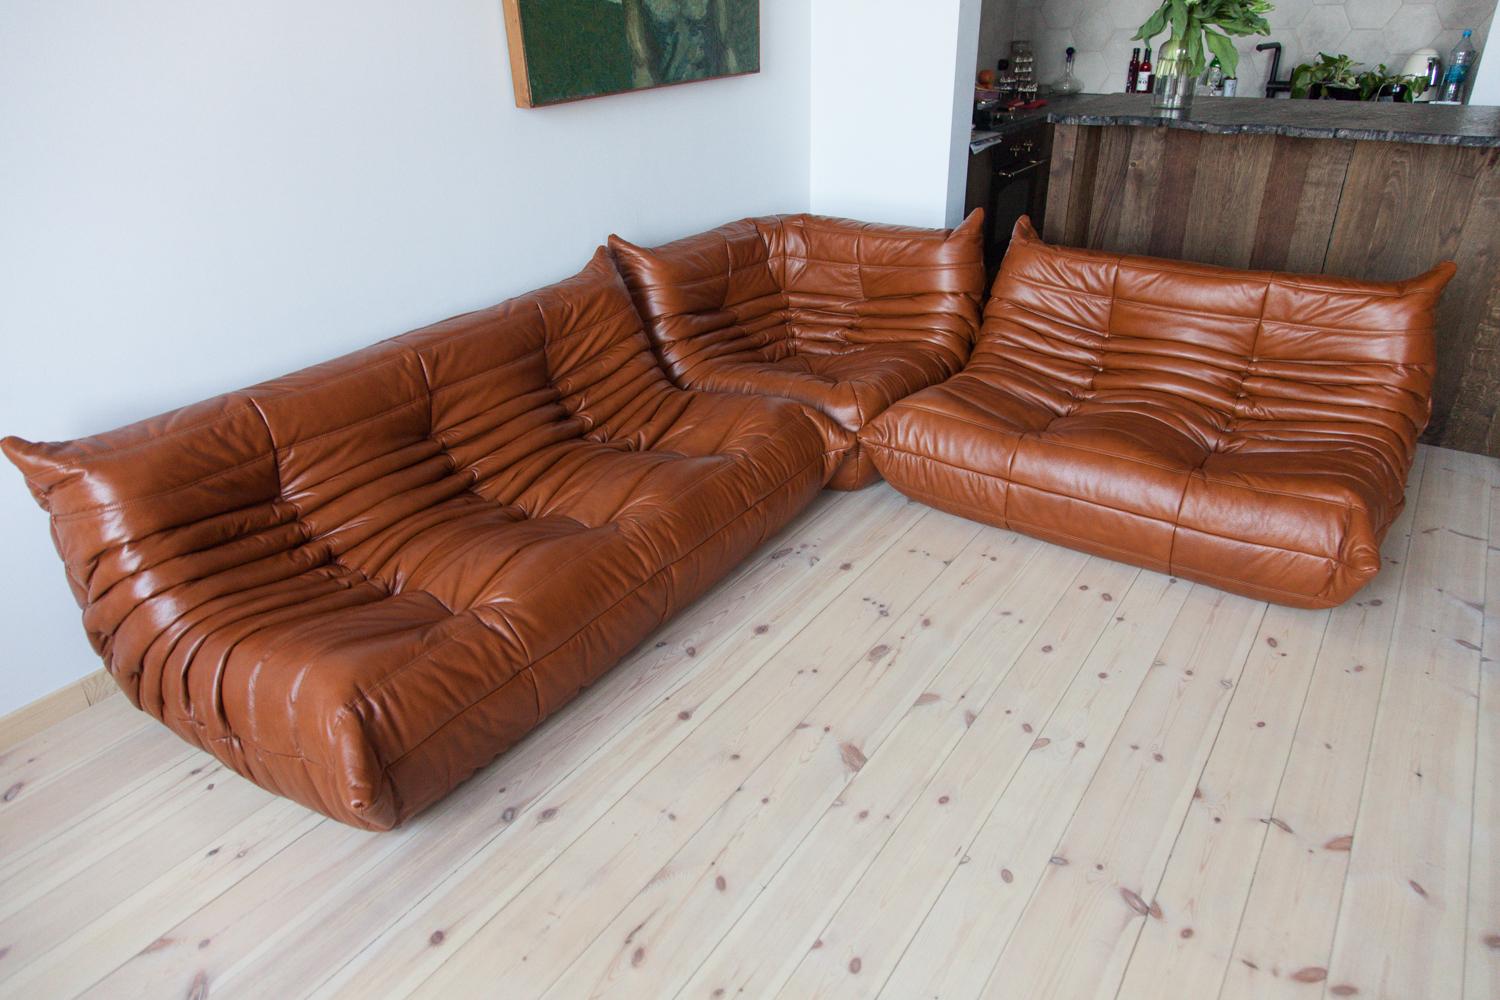 This Togo living room set was designed by Michel Ducaroy in 1973 and was manufactured by Ligne Roset in France. It has been reupholstered in high quality whiskey leather and is made up of the following pieces, each with the original Ligne Roset logo